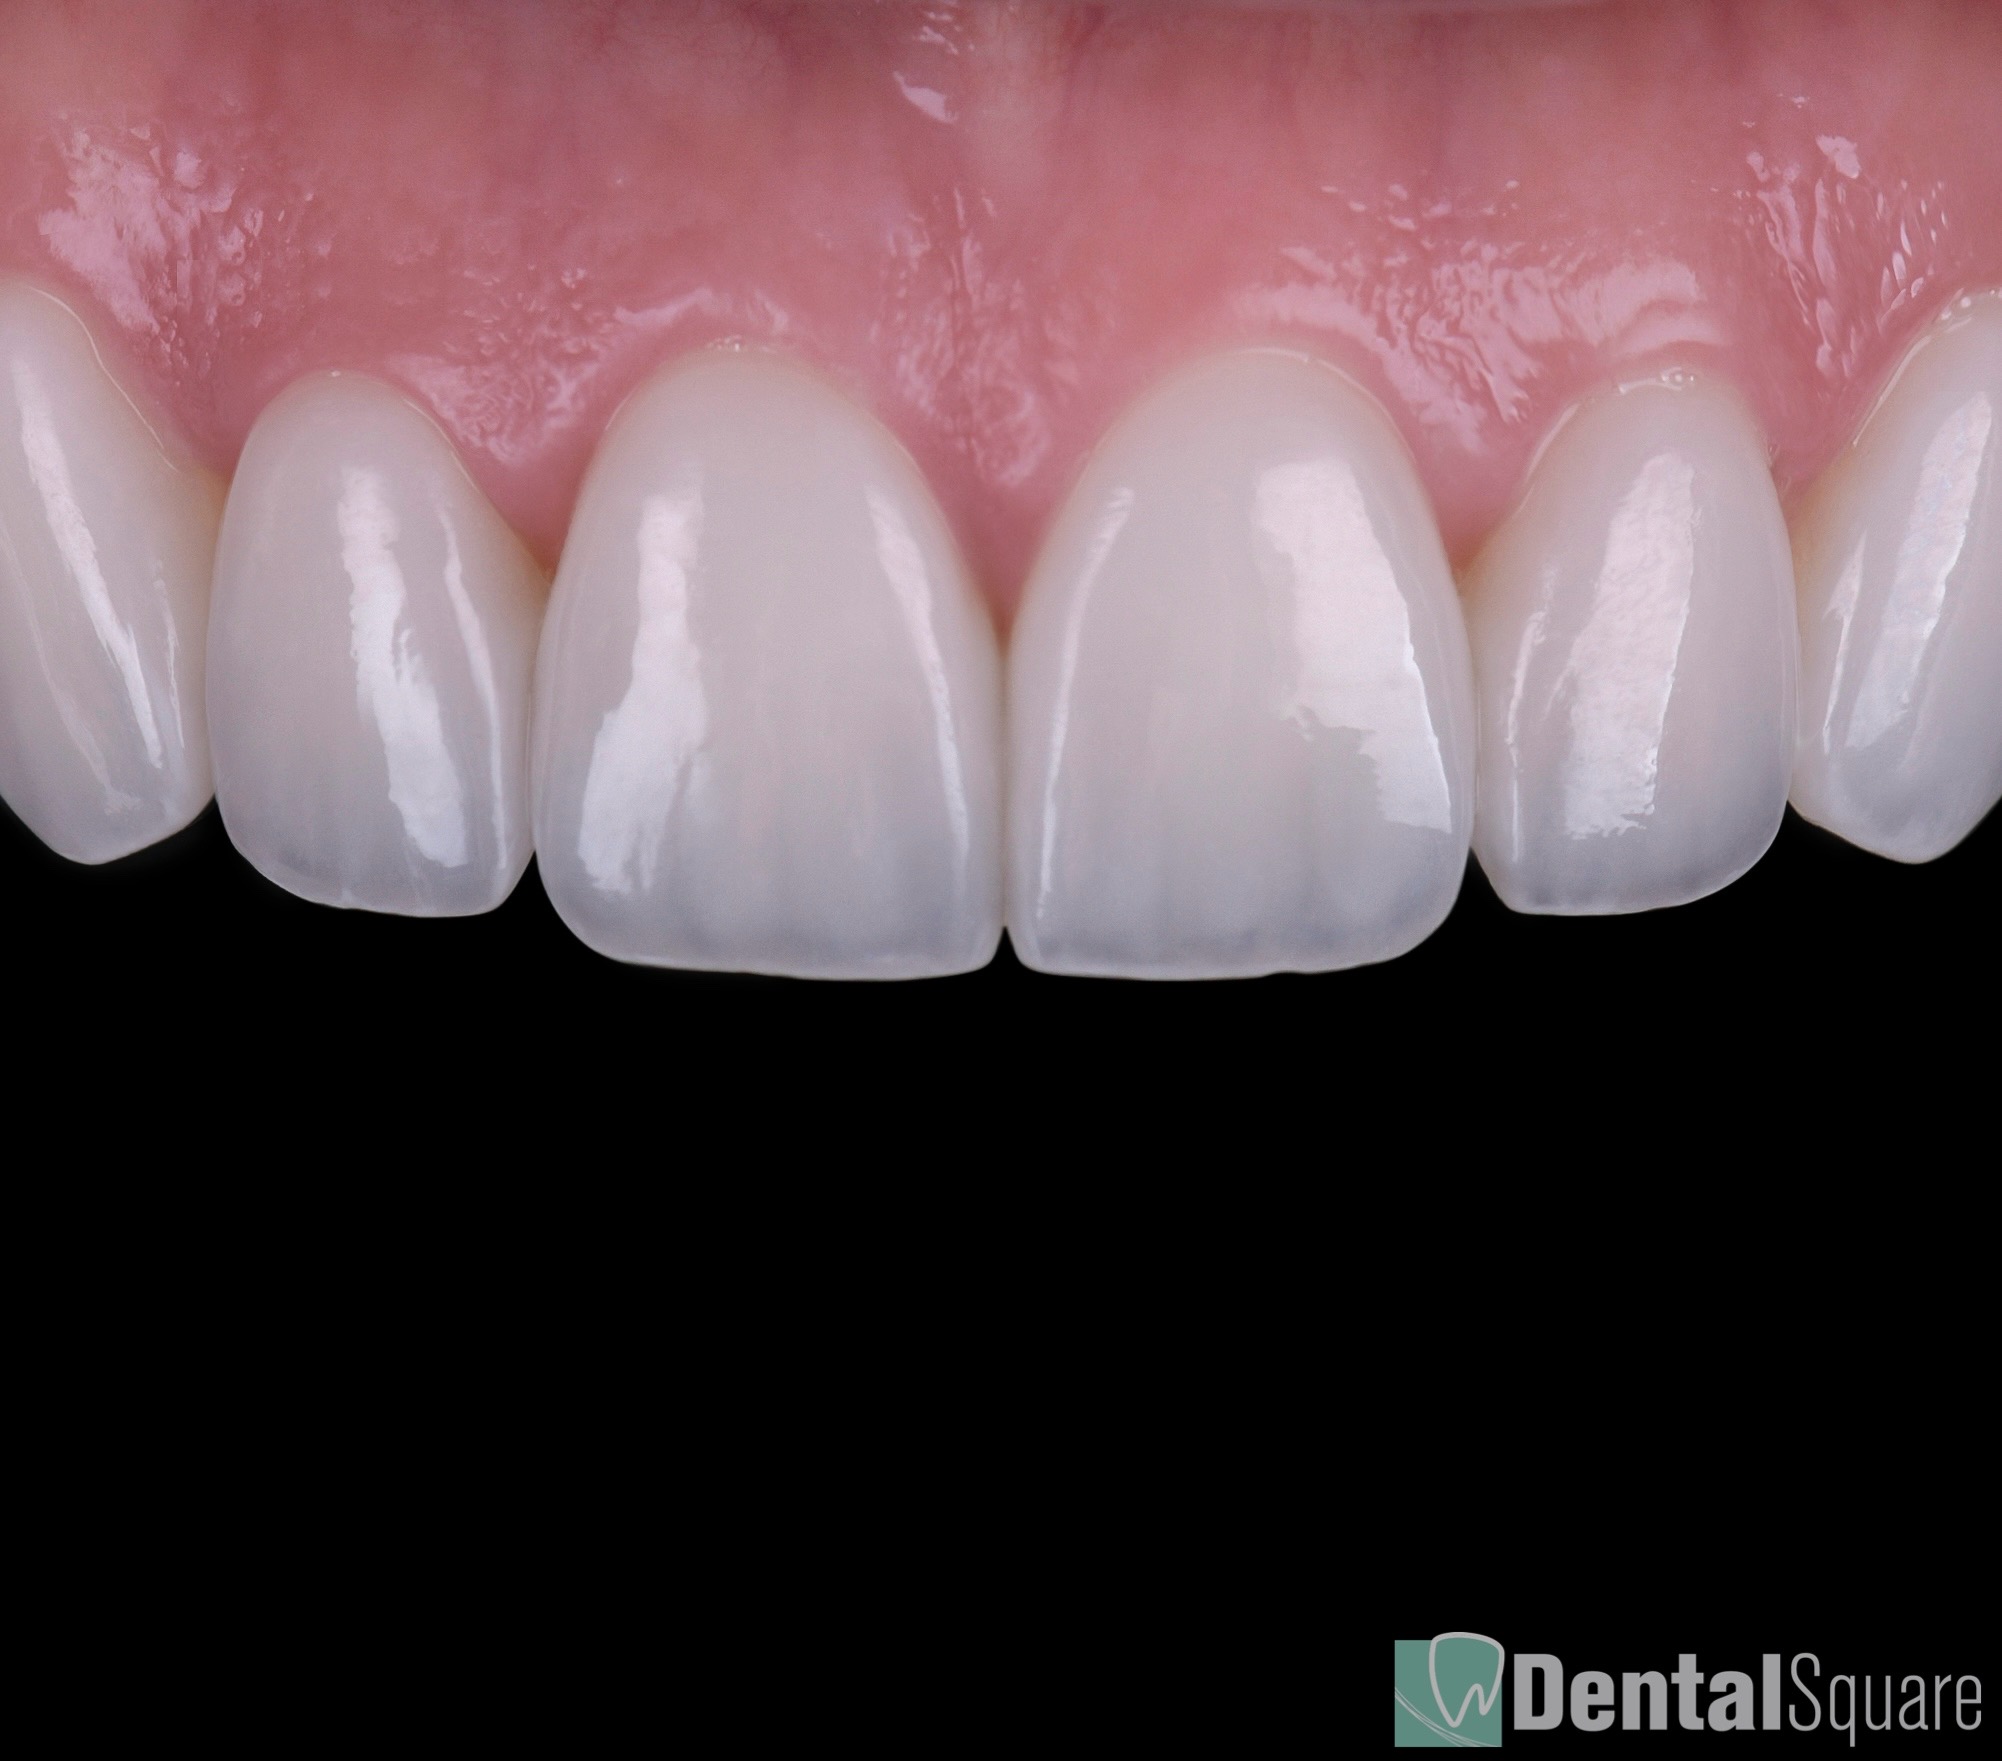 Australia's trusted provider of the most natural porcelain veneers